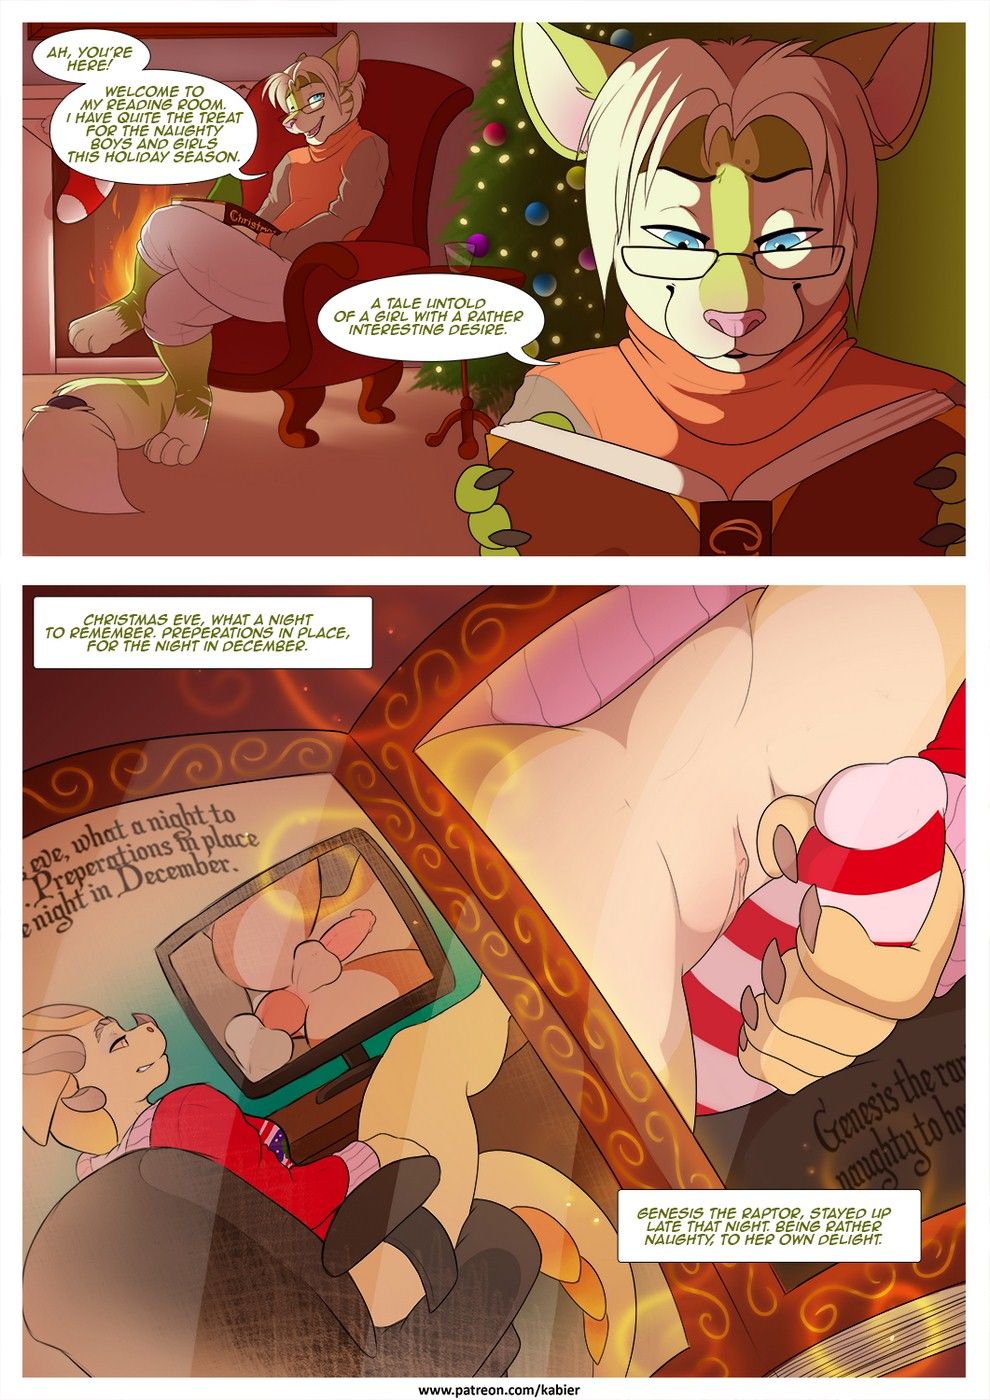 Christmas Came Early - Kabier page 2